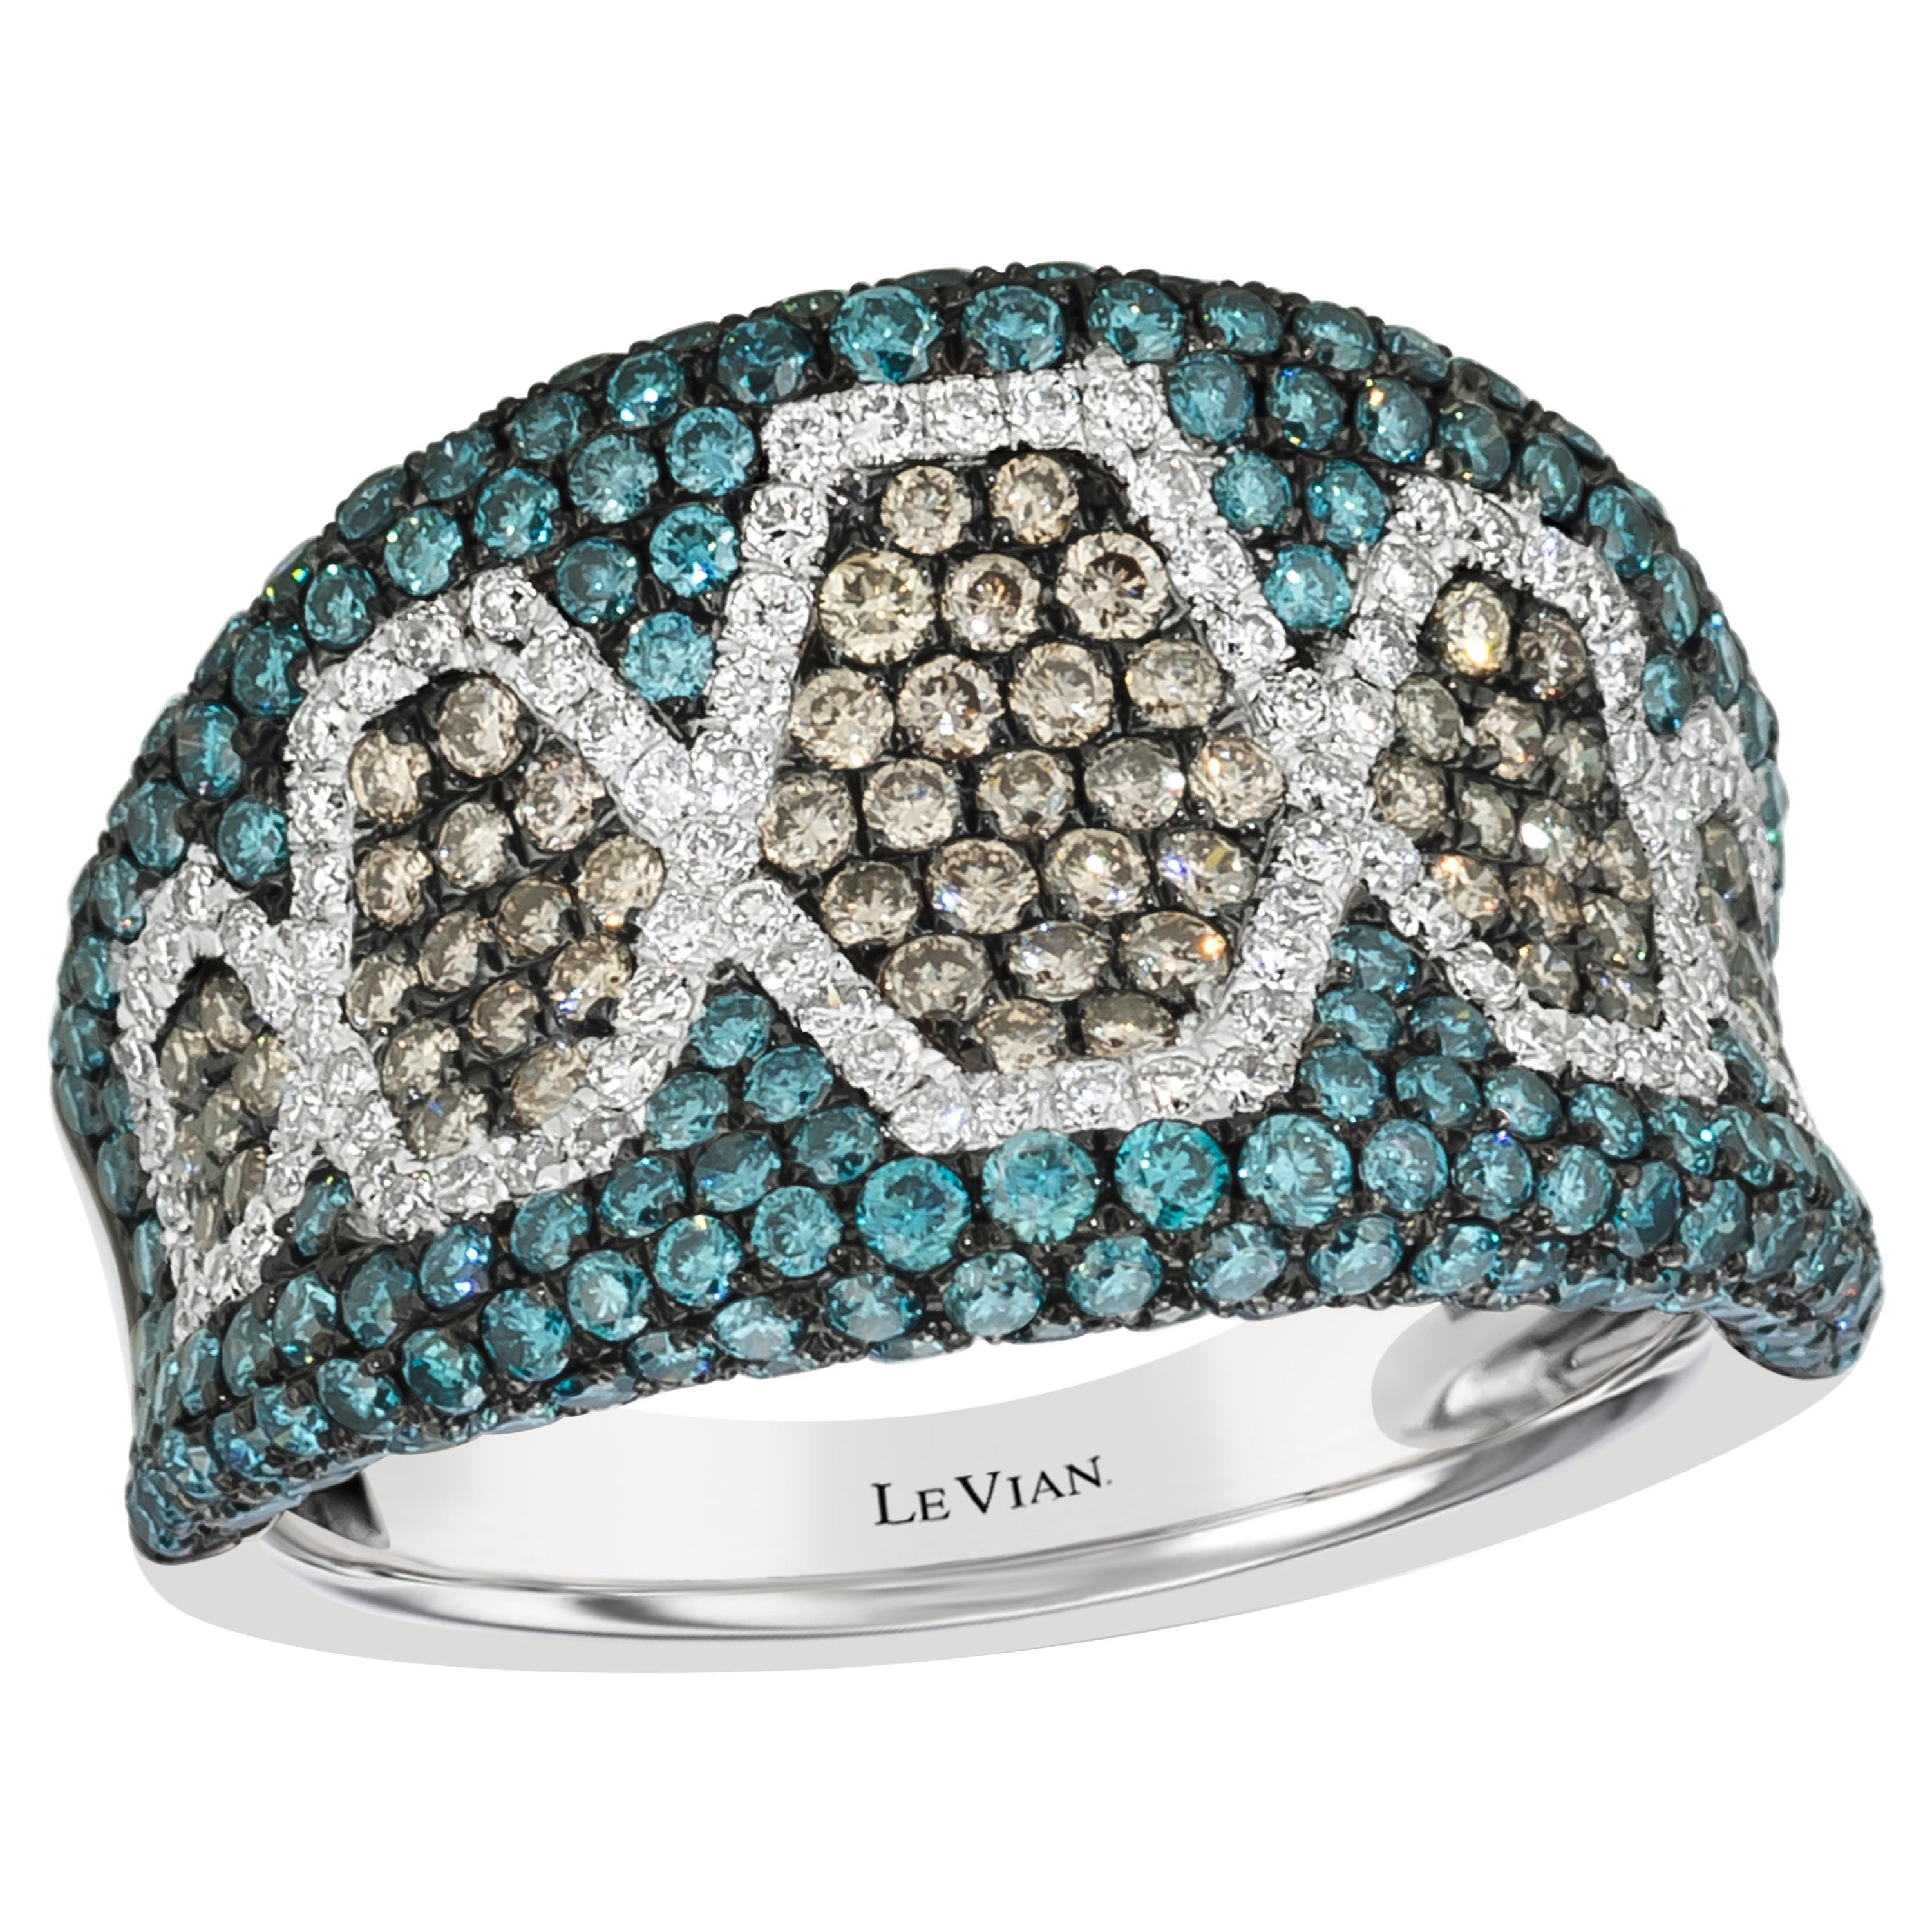 LeVian Ring Chocolate, Blue, and White Diamonds Set in 14K White Gold